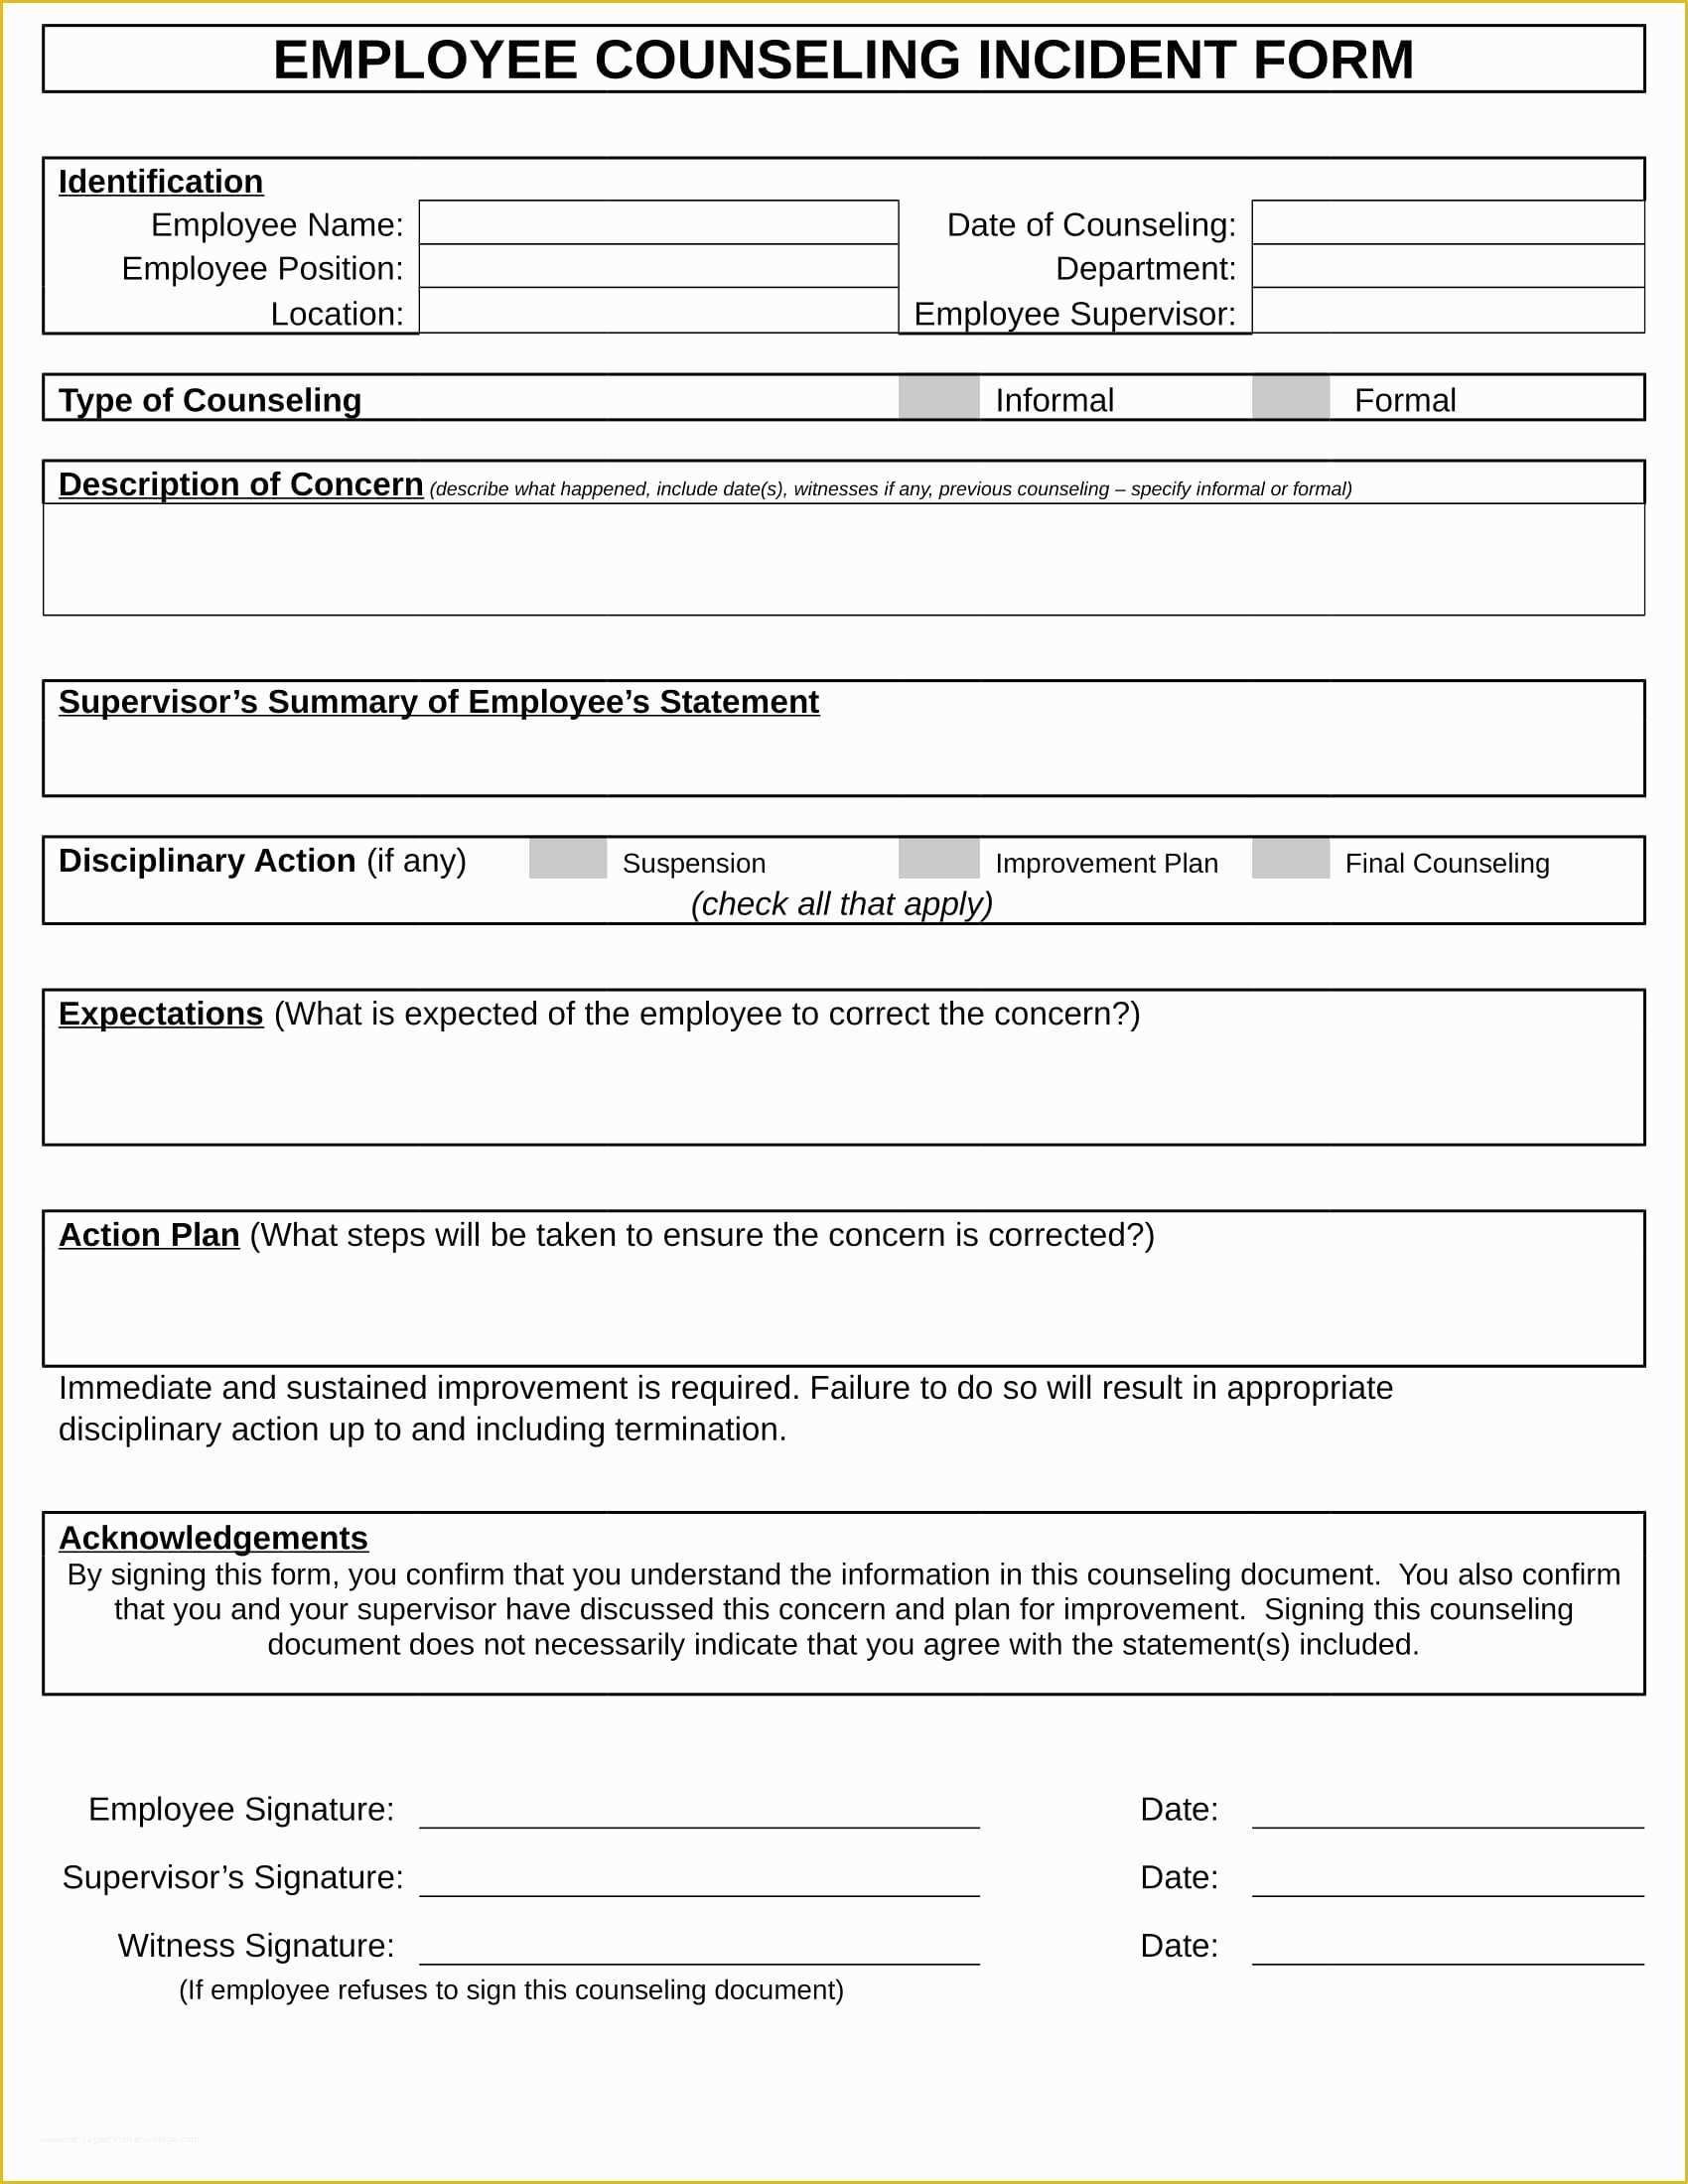 Free Counseling forms Templates Of Employee Counseling form Template – Radiofama